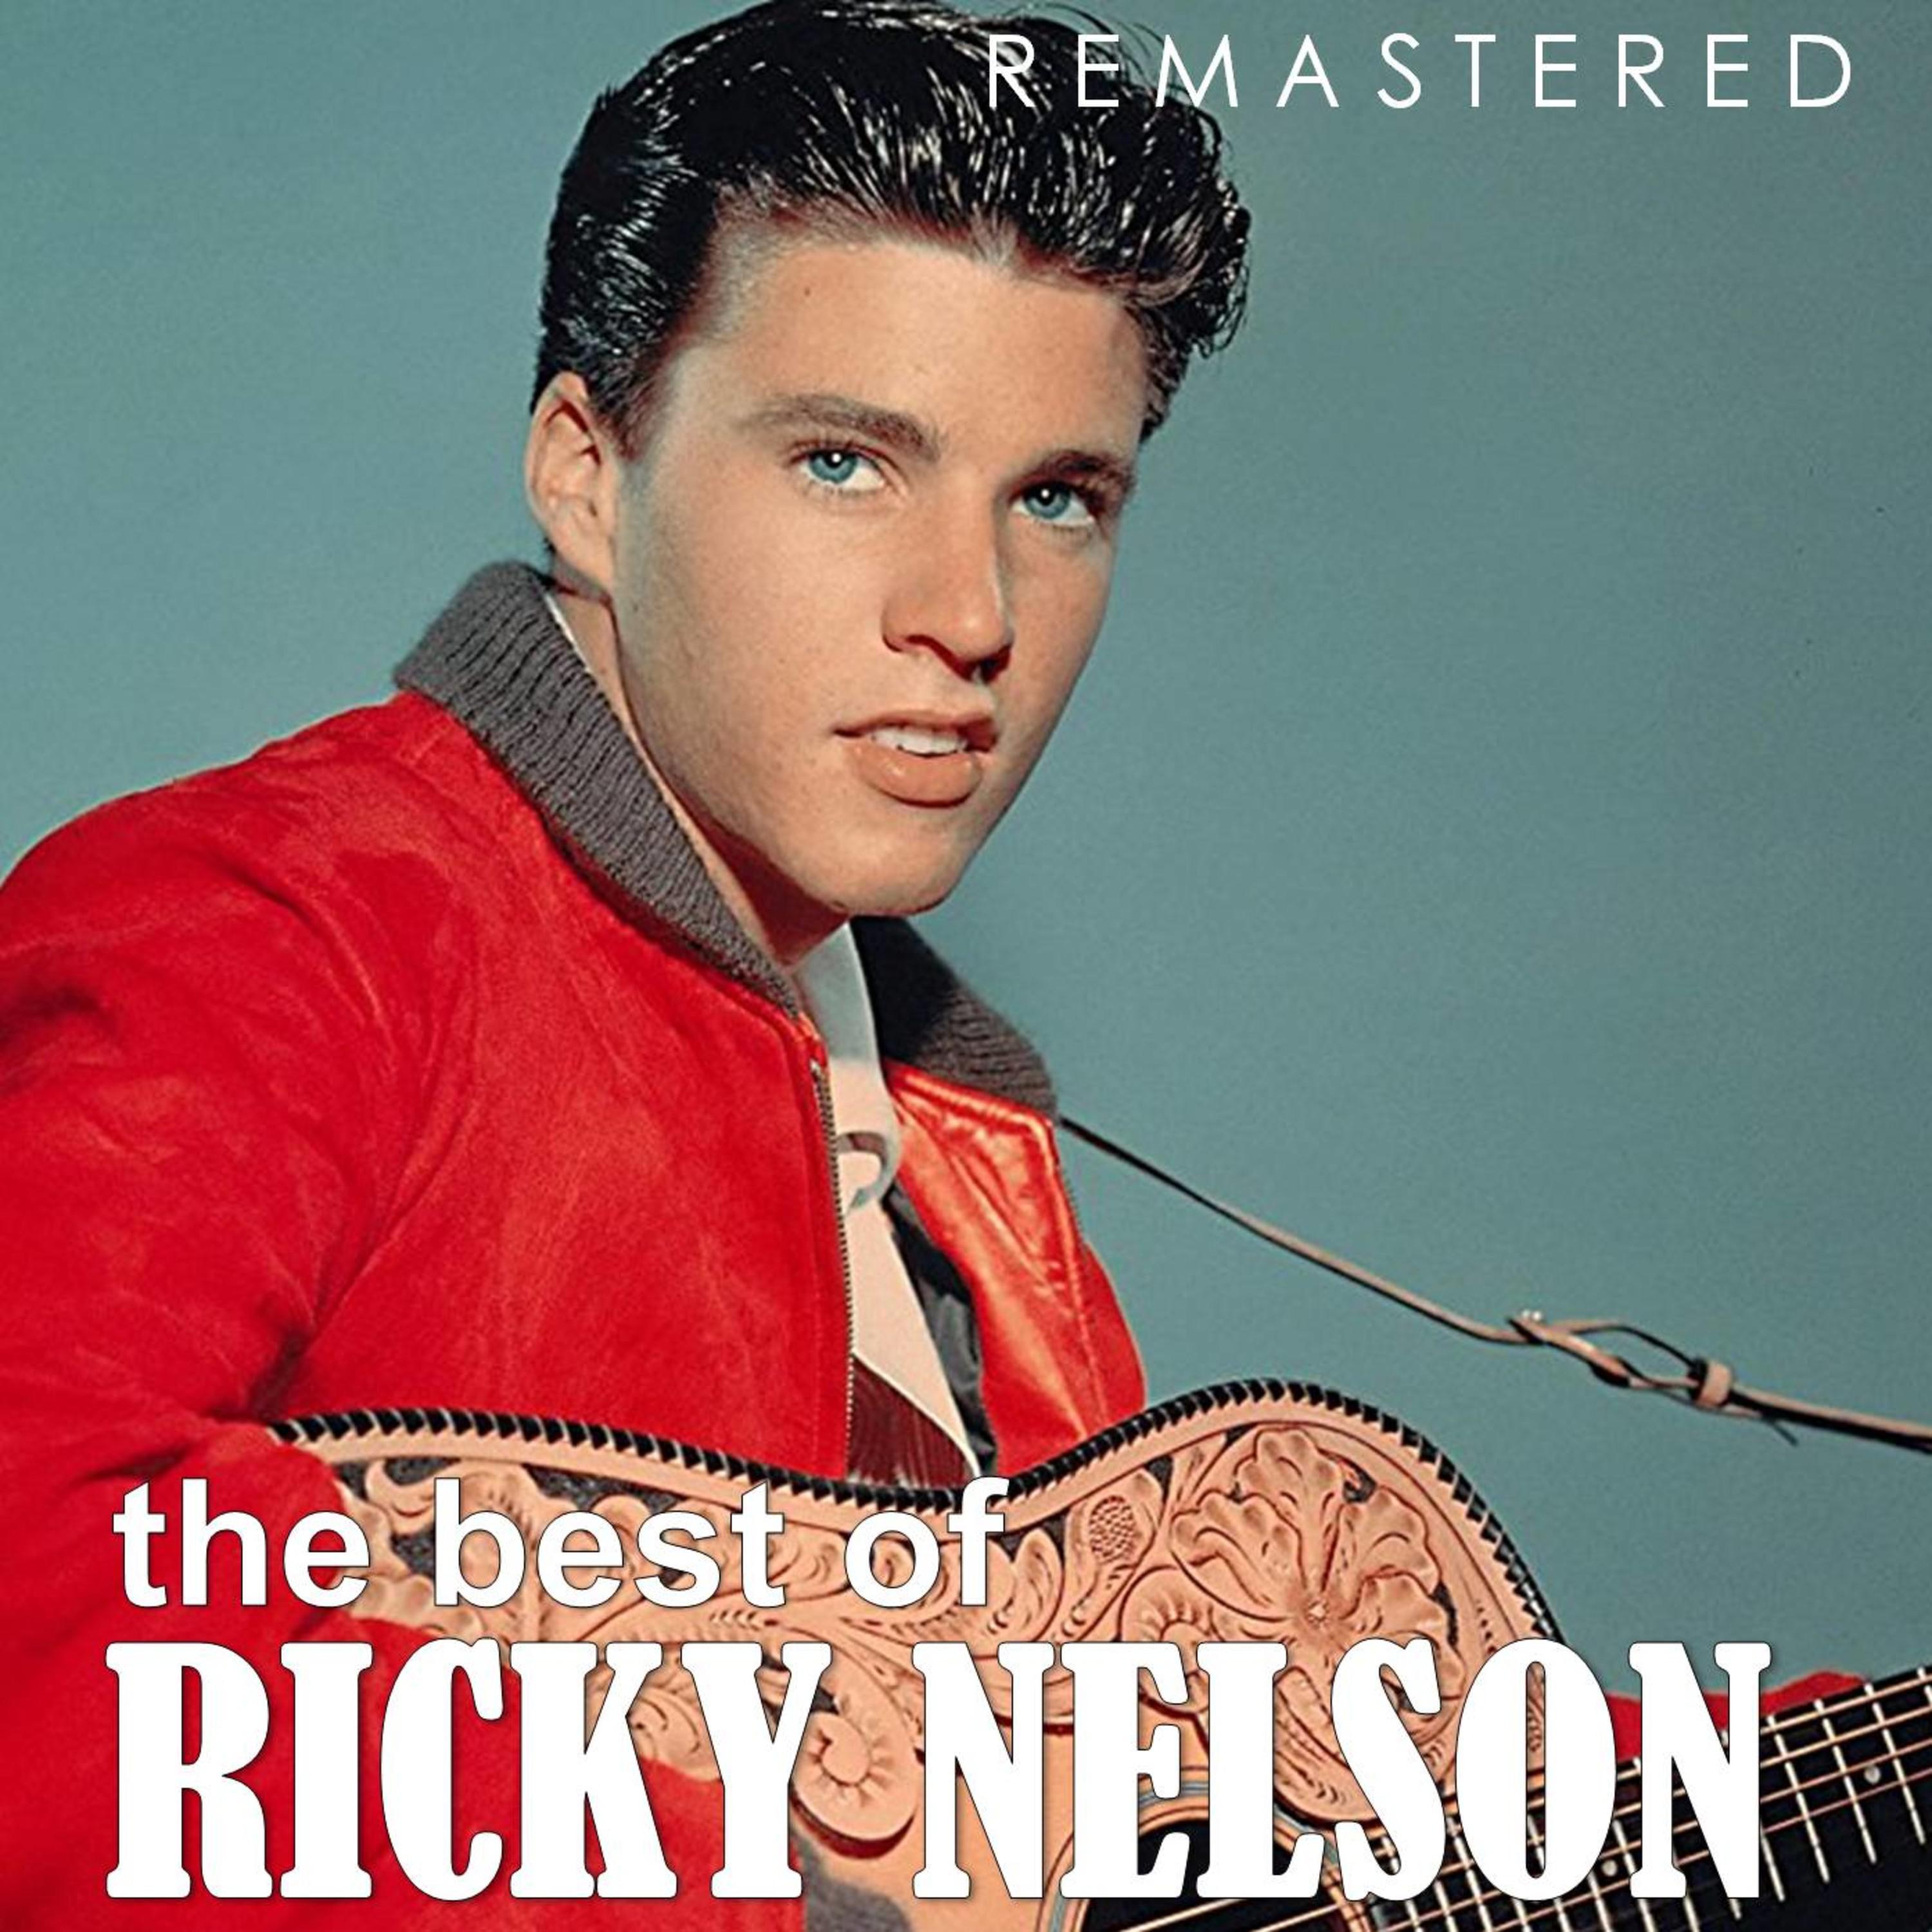 The Best of Ricky Nelson (Remastered)